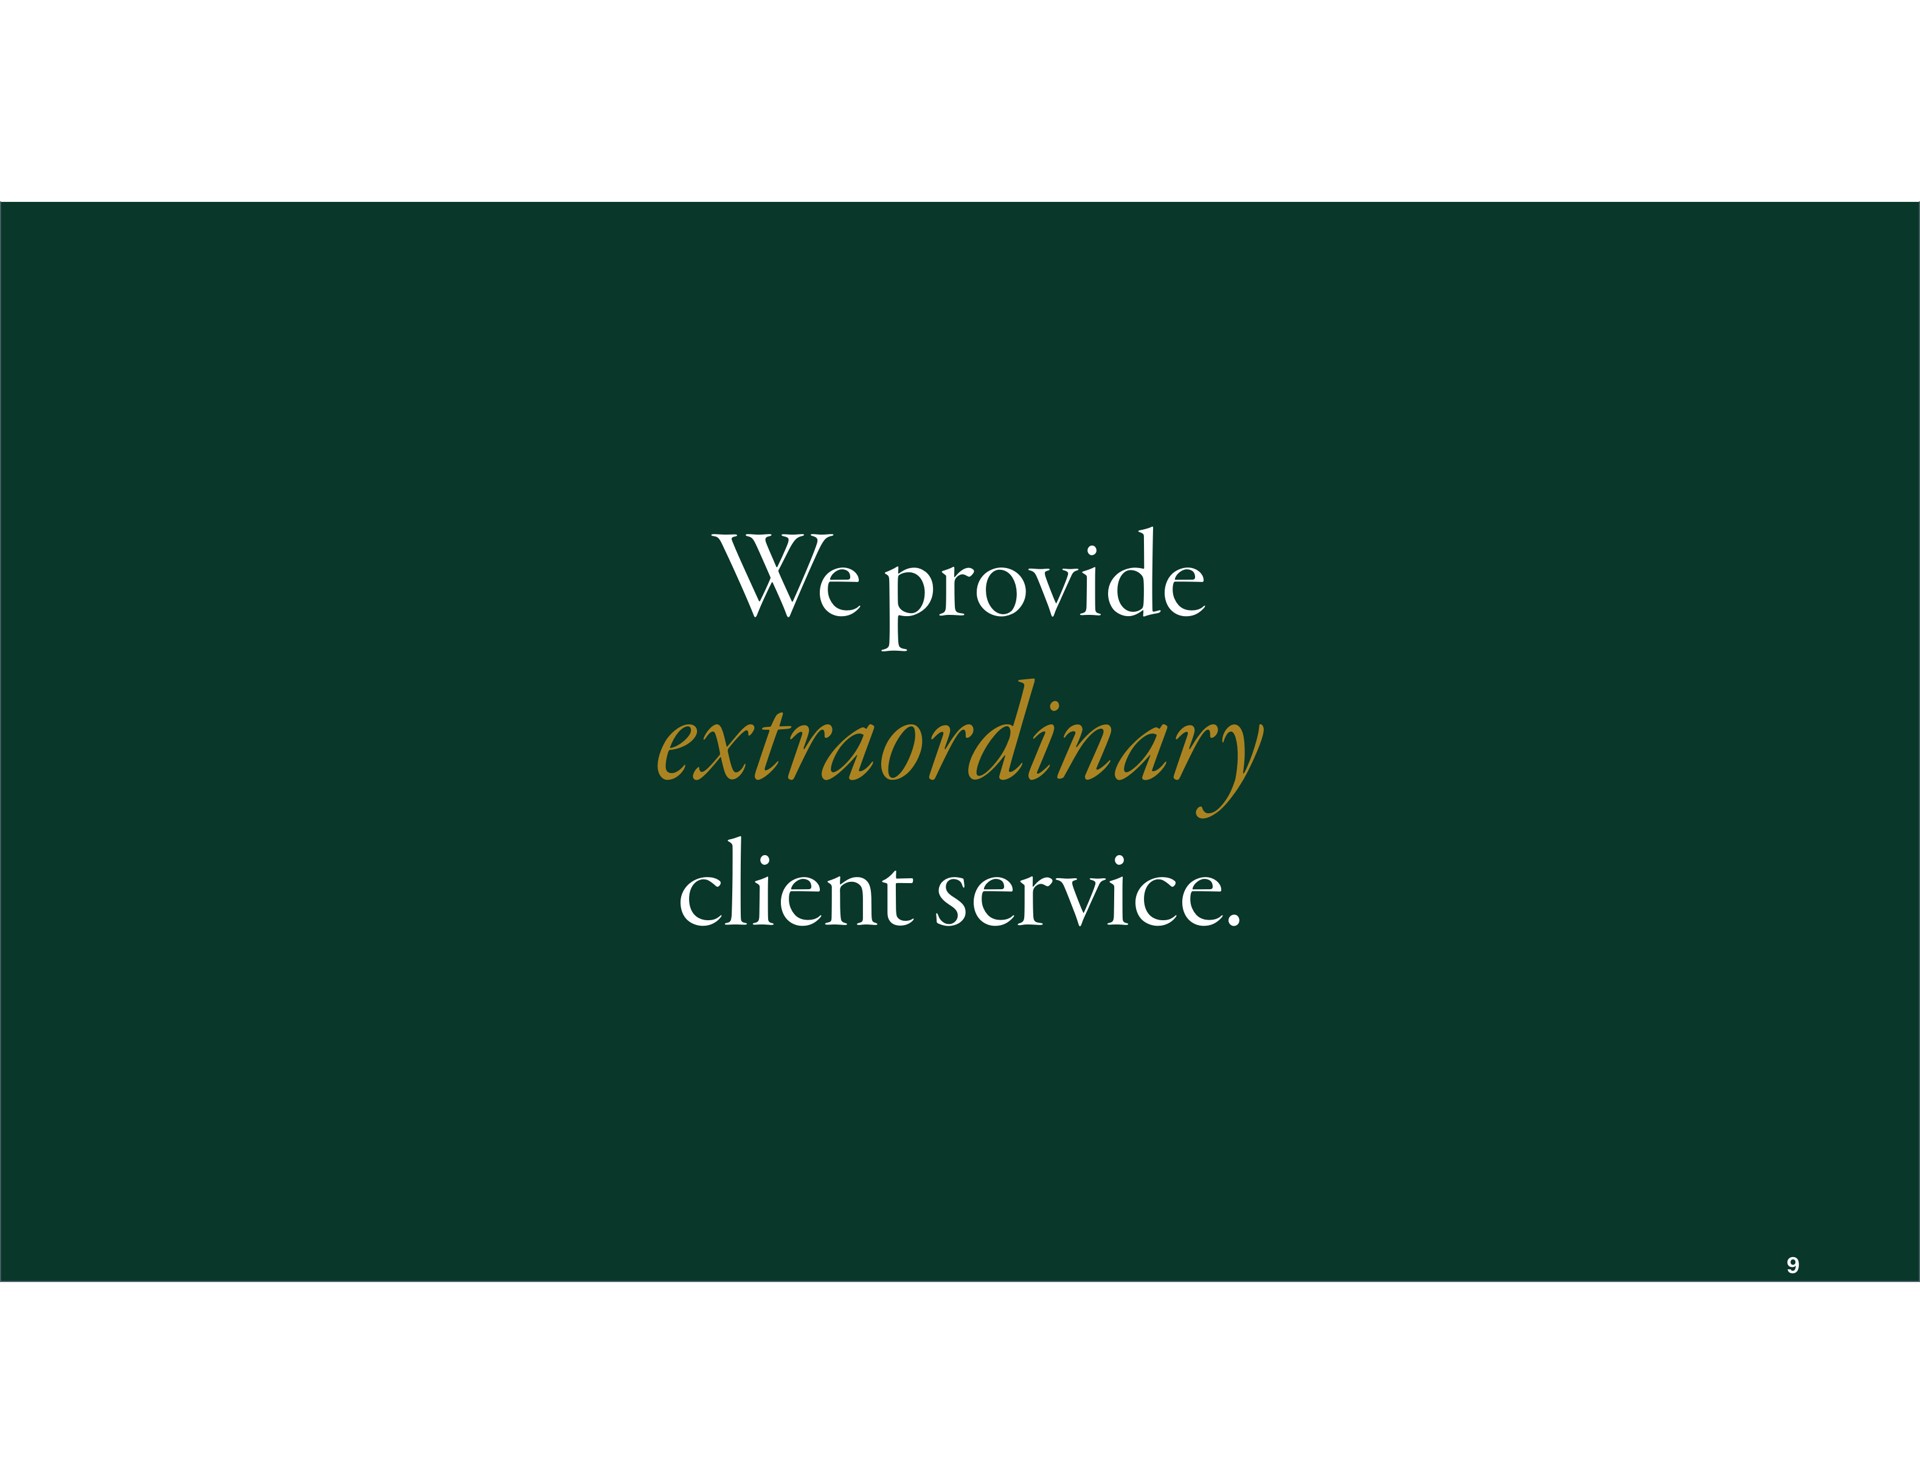 we provide extraordinary client service | First Republic Bank